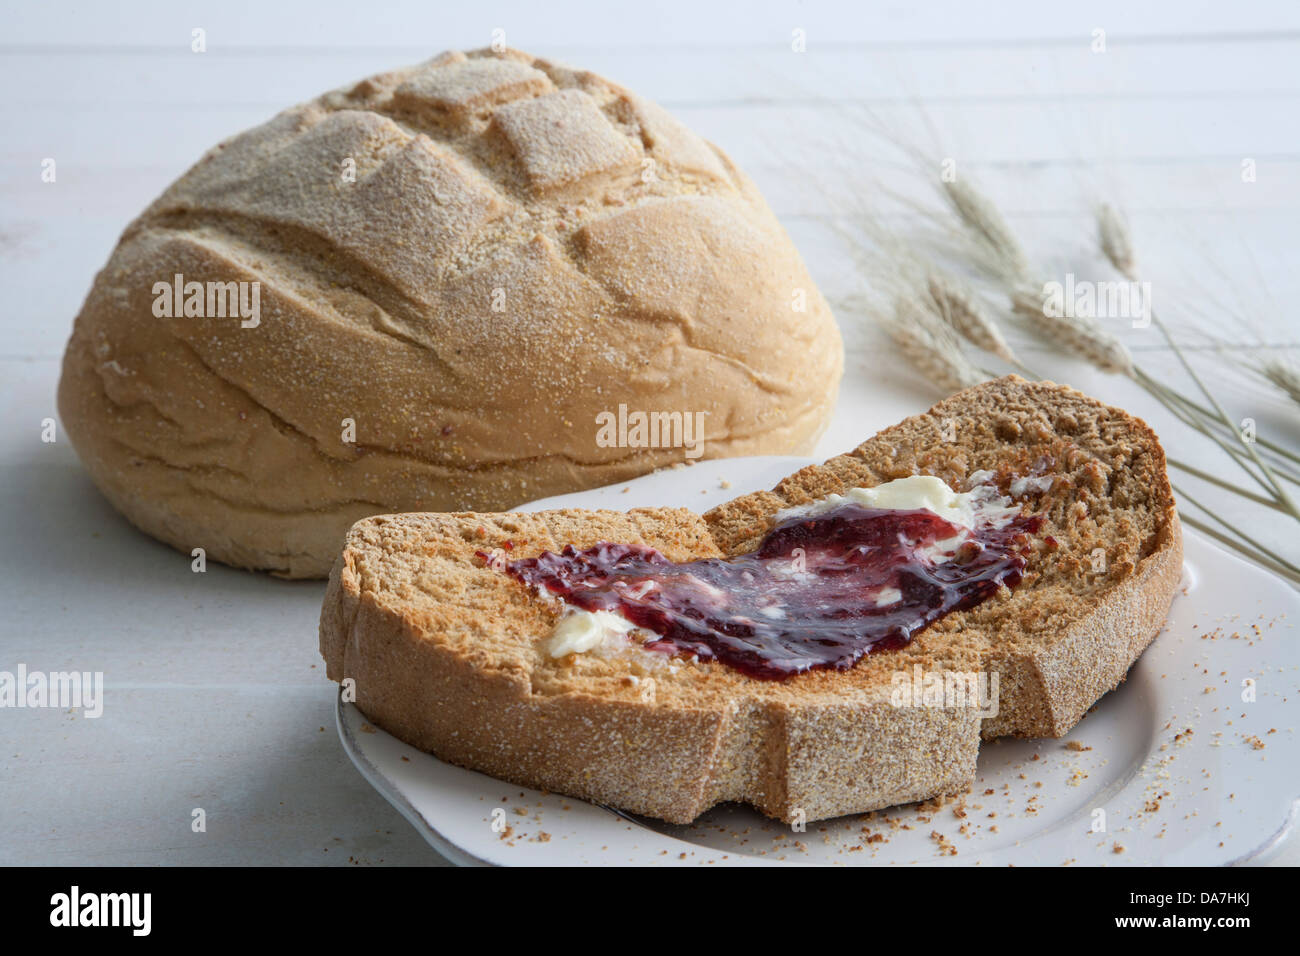 slice of homemade bread with melted butter and strawberry jam Stock Photo